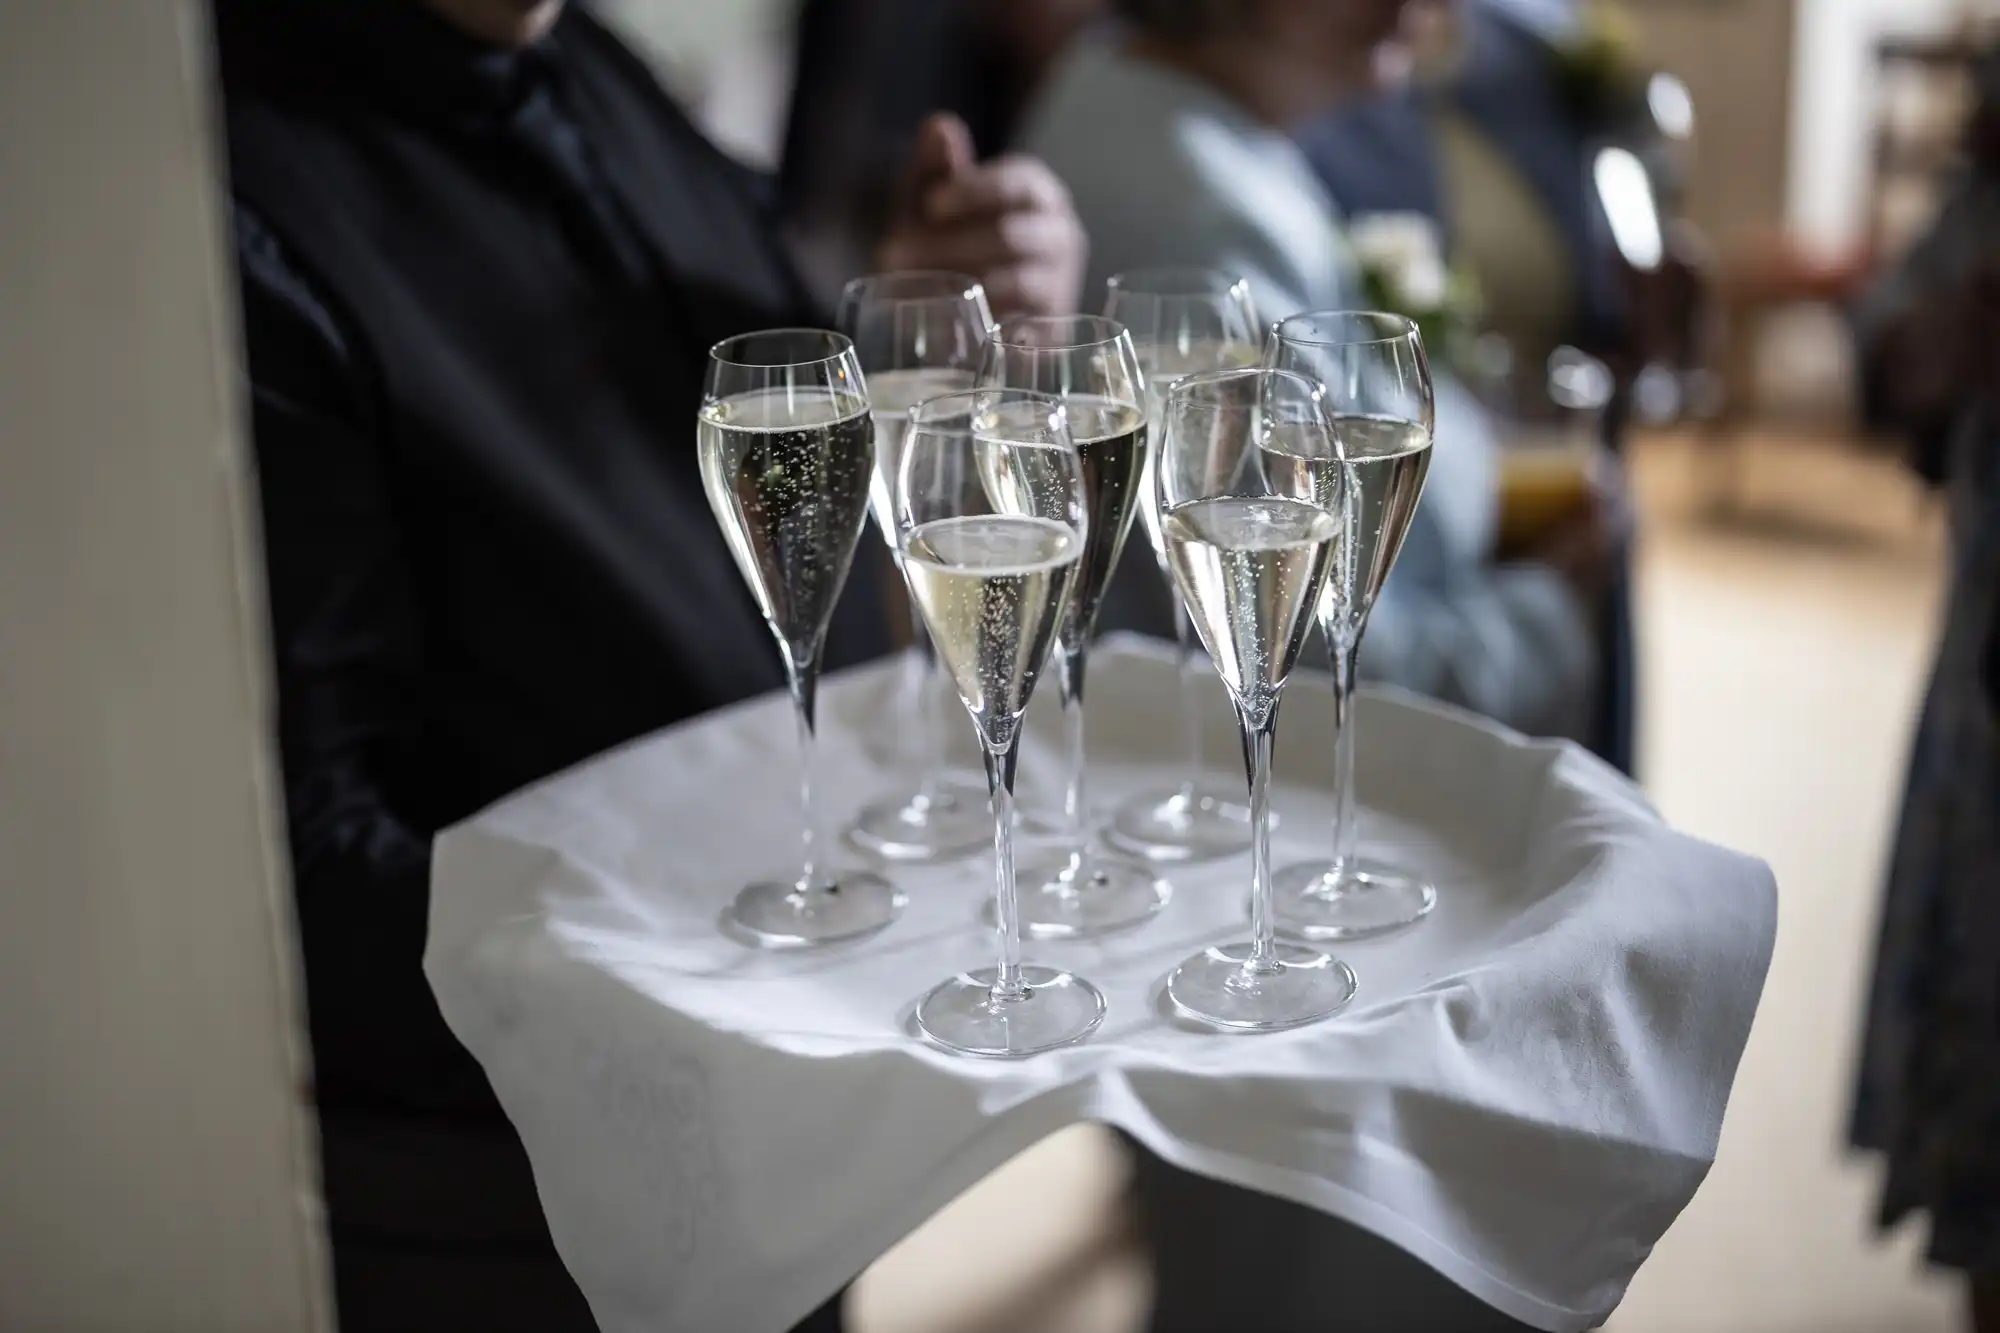 A person holding a tray with eight filled champagne flutes in a social event setting.